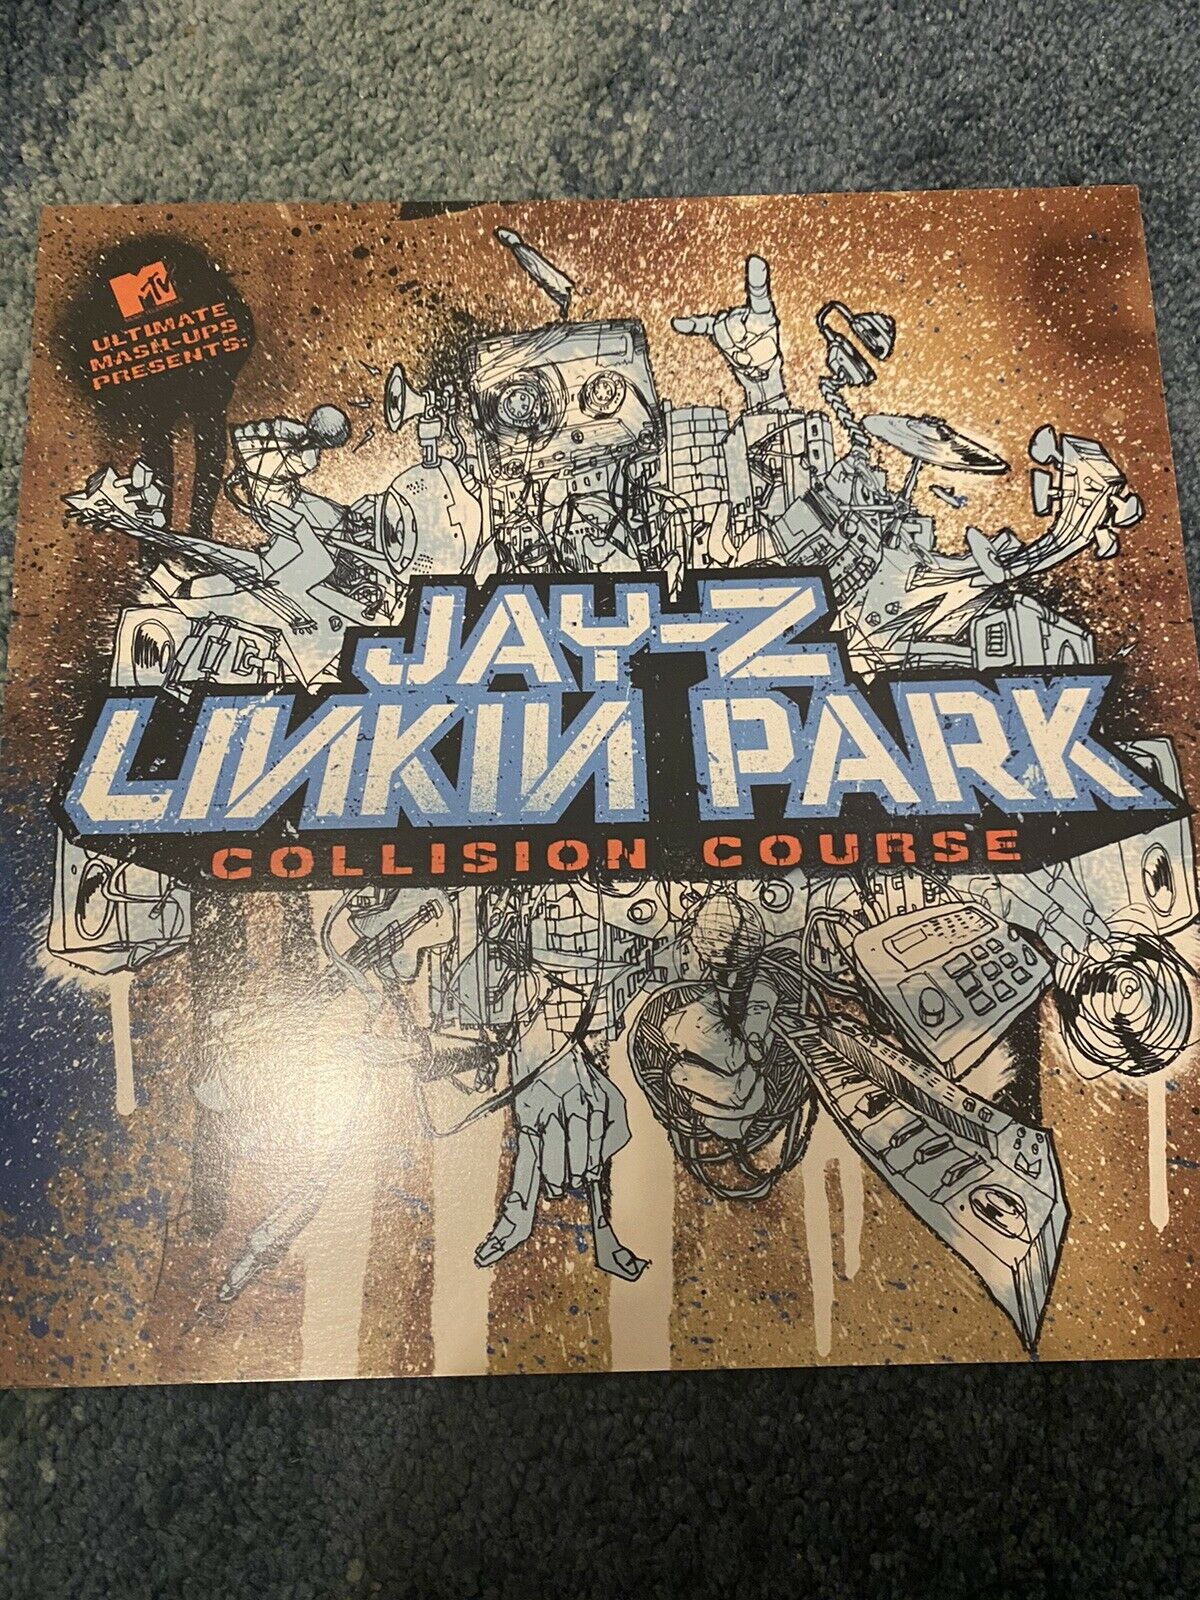 Jay-z Linkin Park Collision Course Record Insert Only